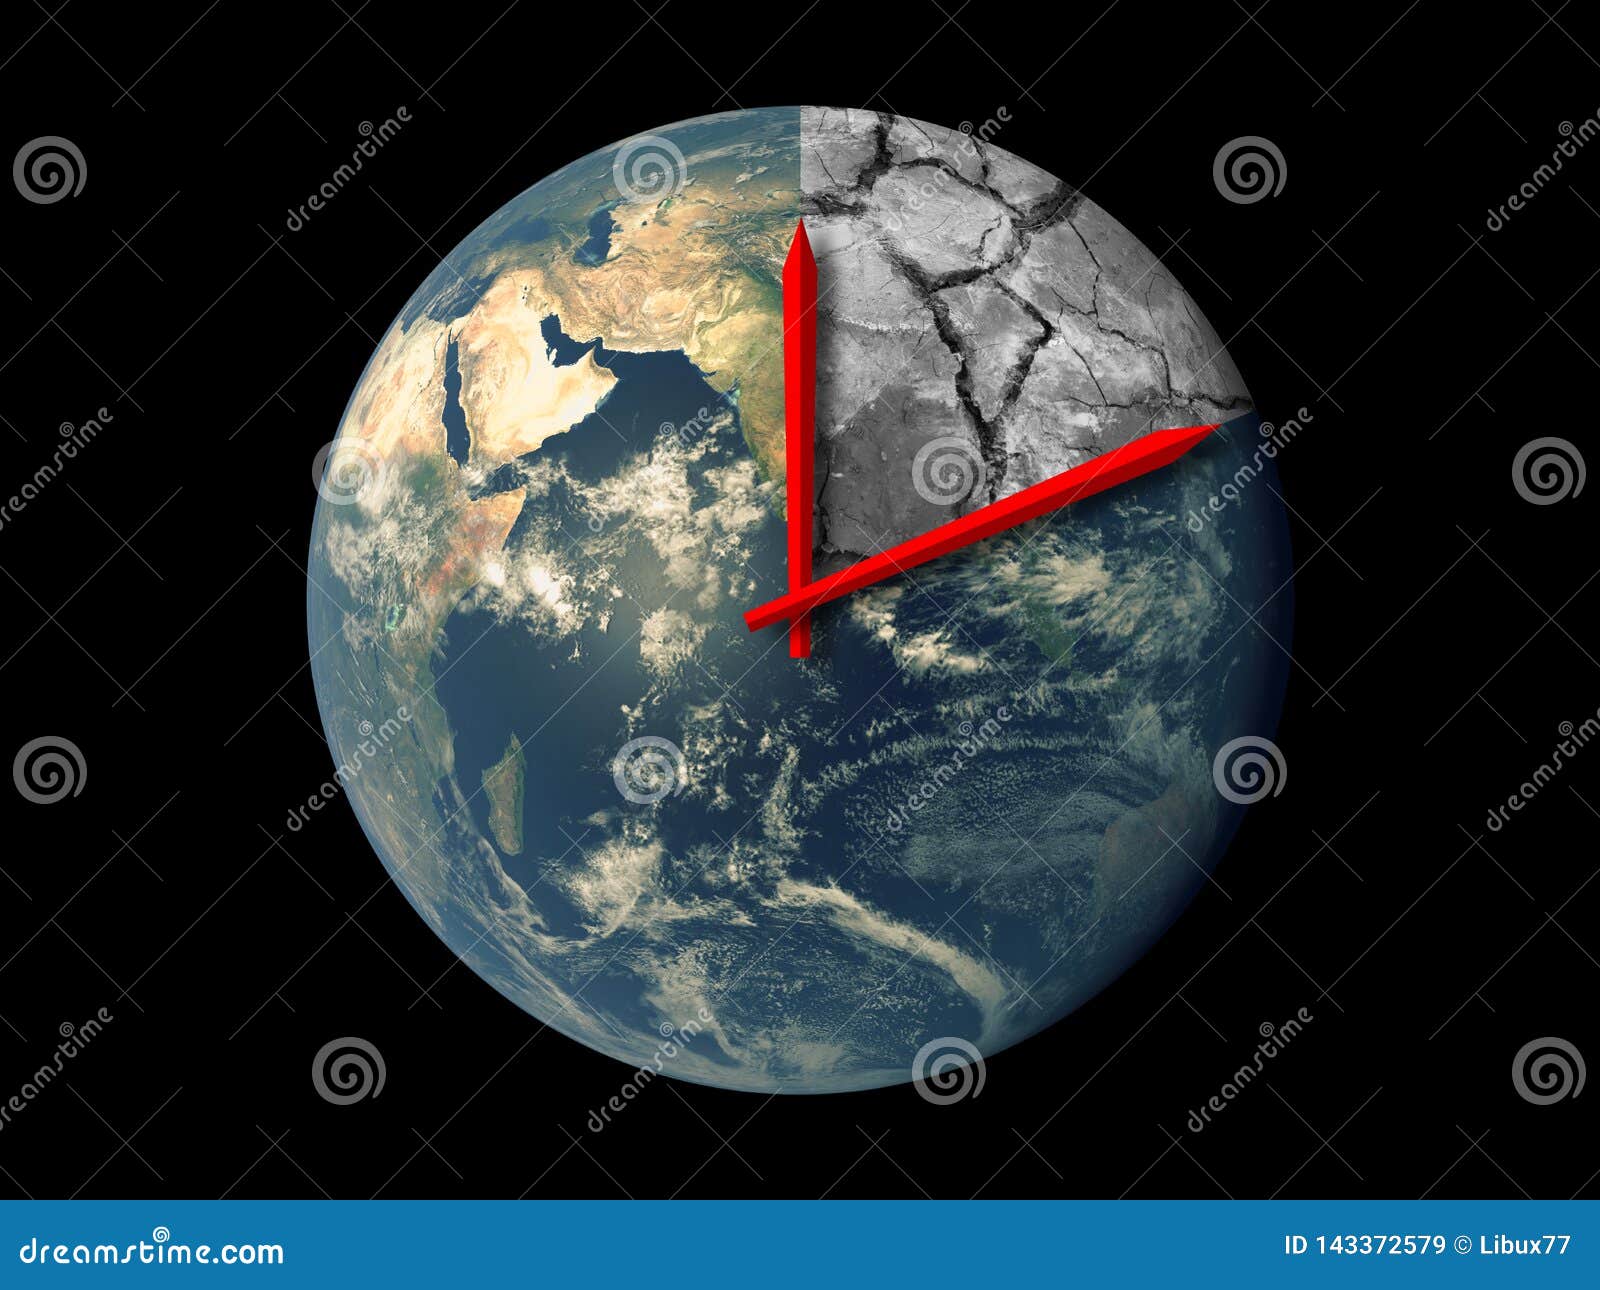 planet earth ecology death countdown concept. red hands clock on earth running towards natural climate change disaster 